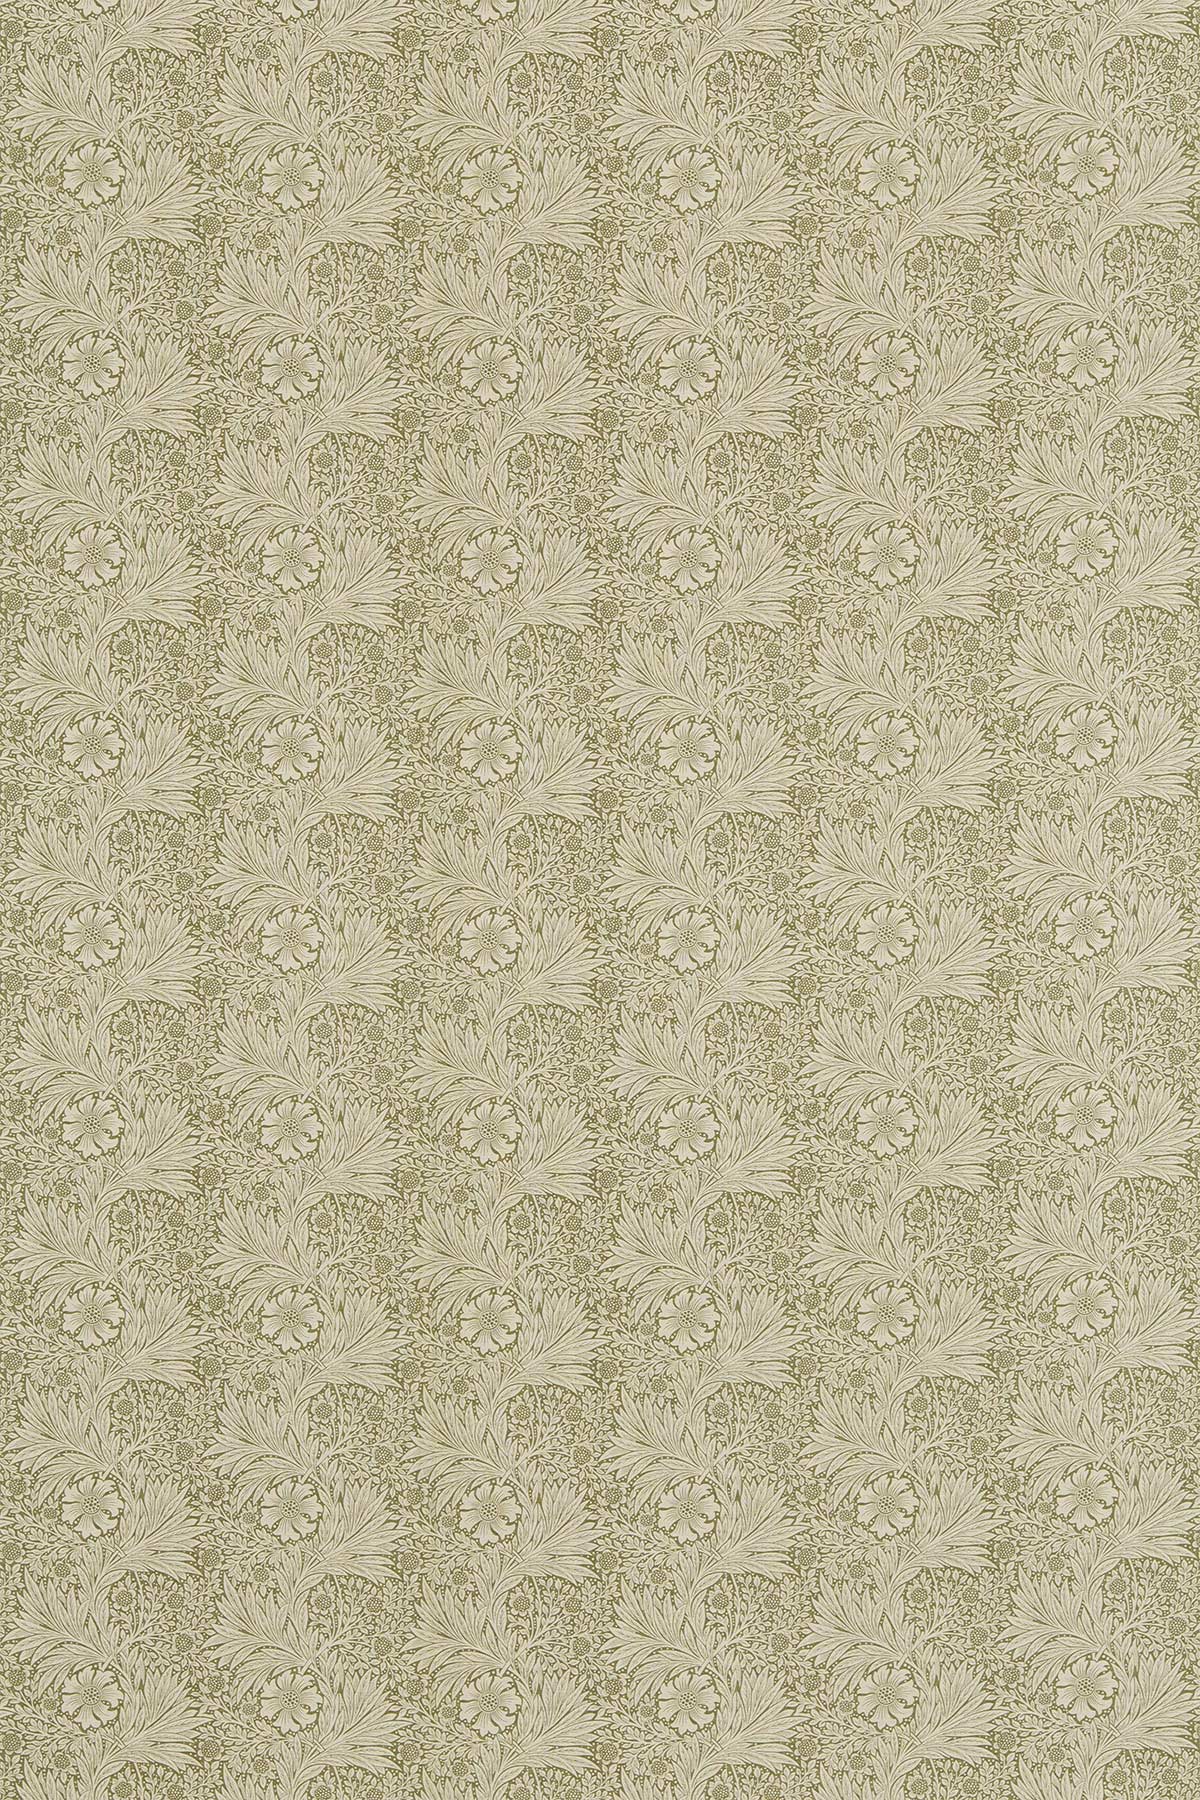 Marigold Fabric - Olive / Linen - by Morris